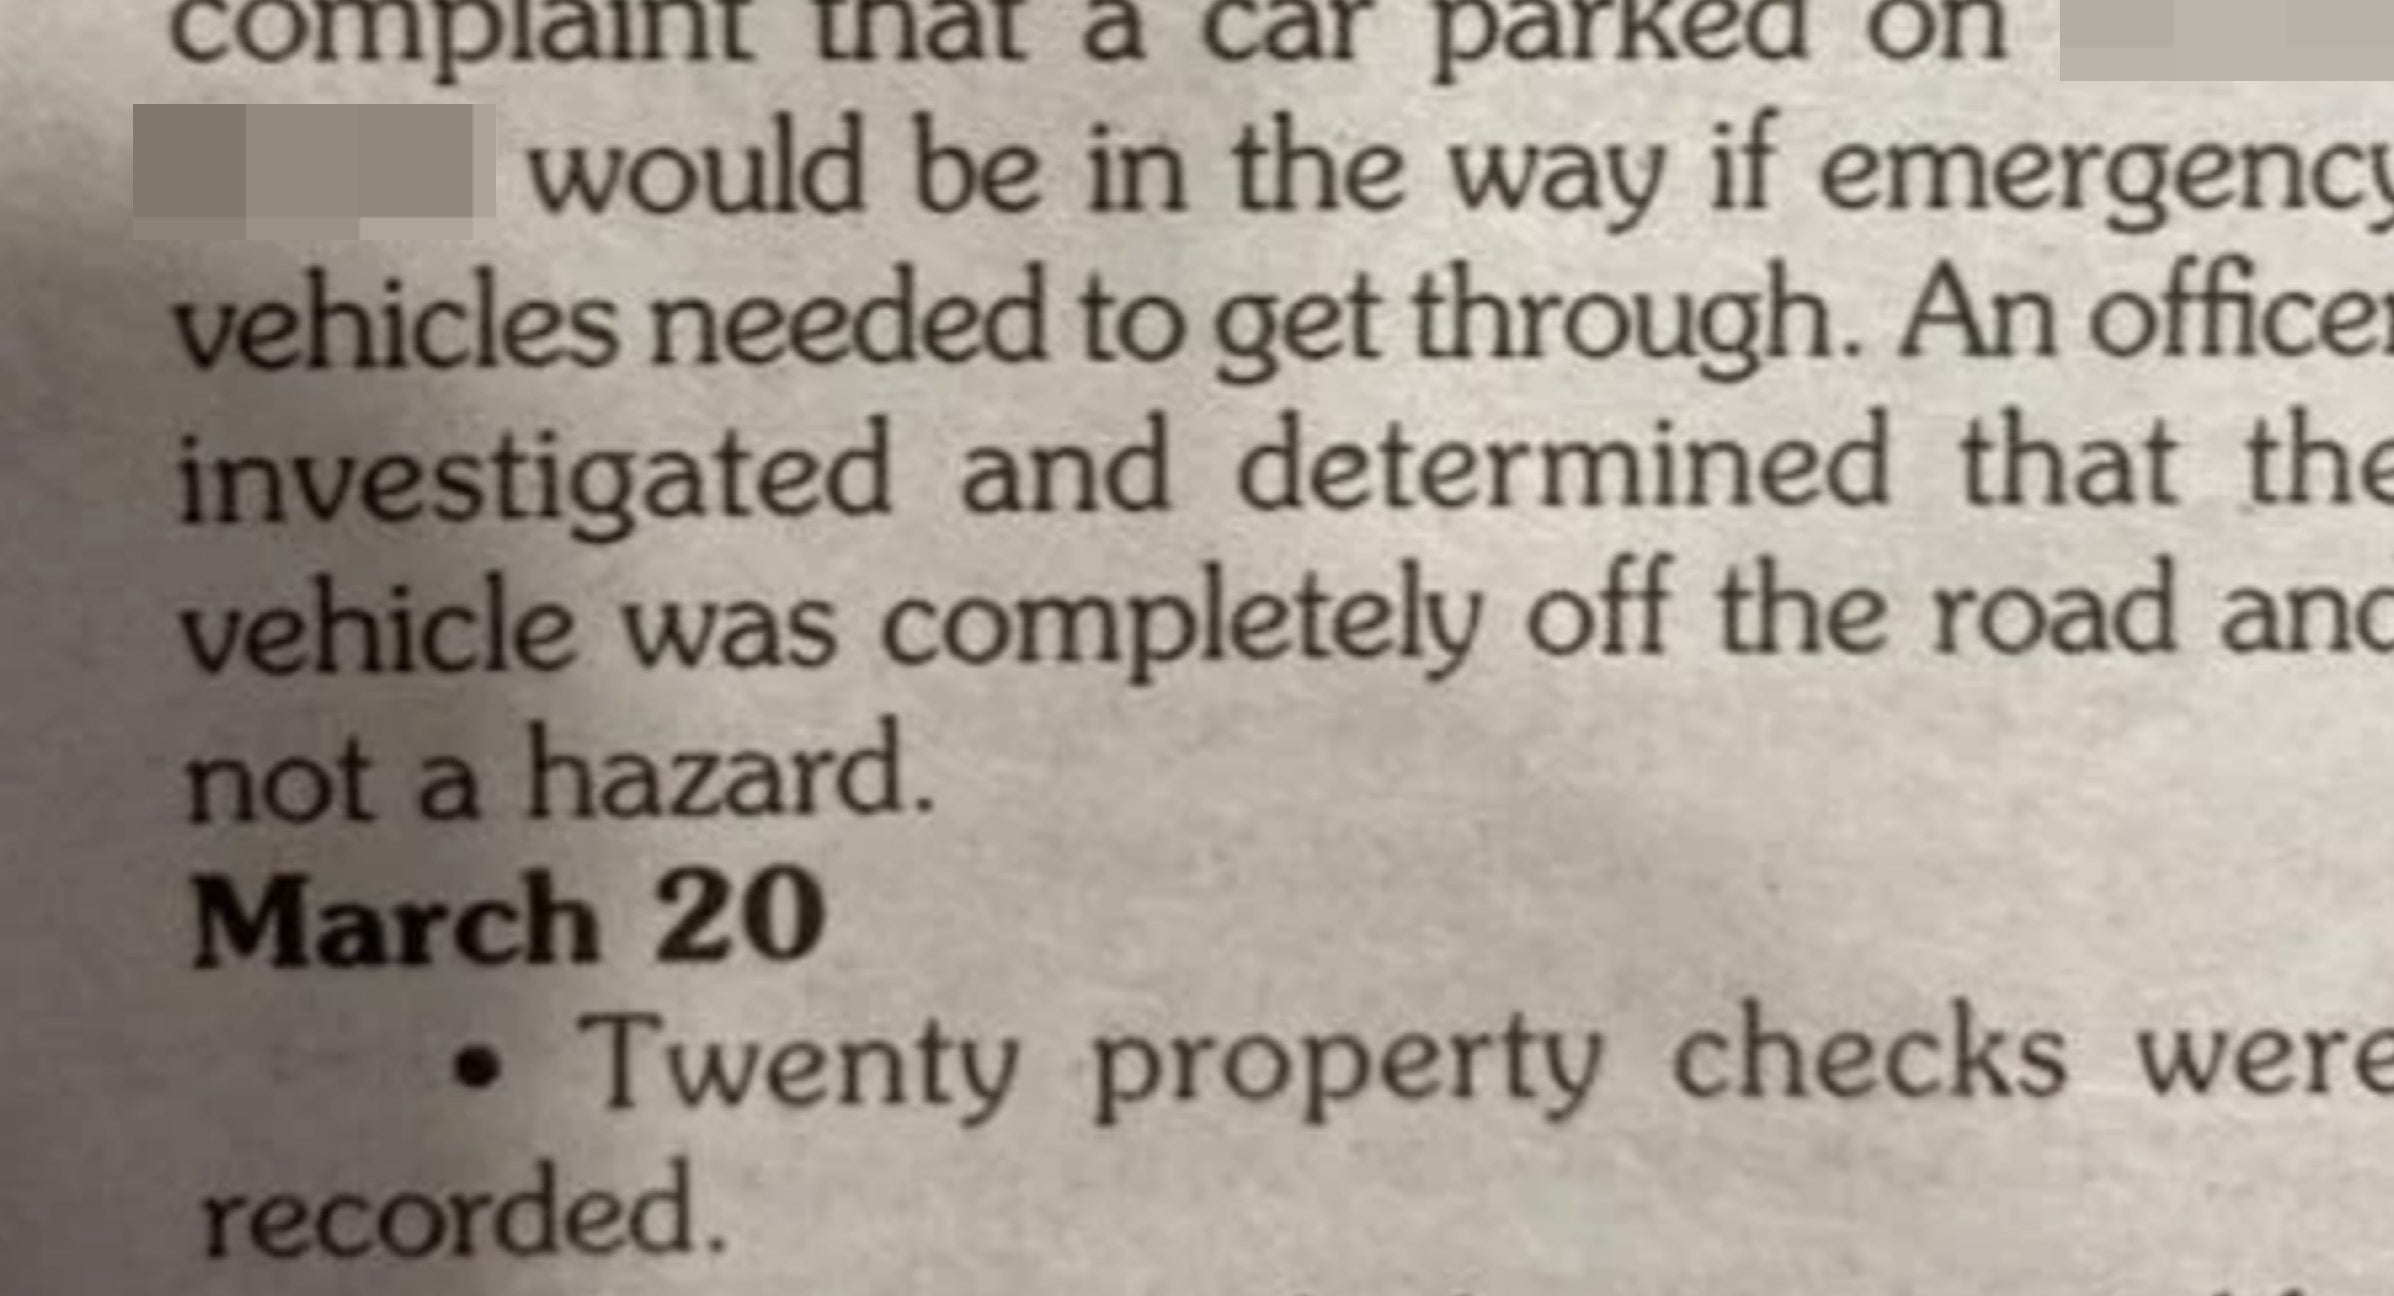 the police report saying that the car was not a hazard and could safely be parked on the side of the road